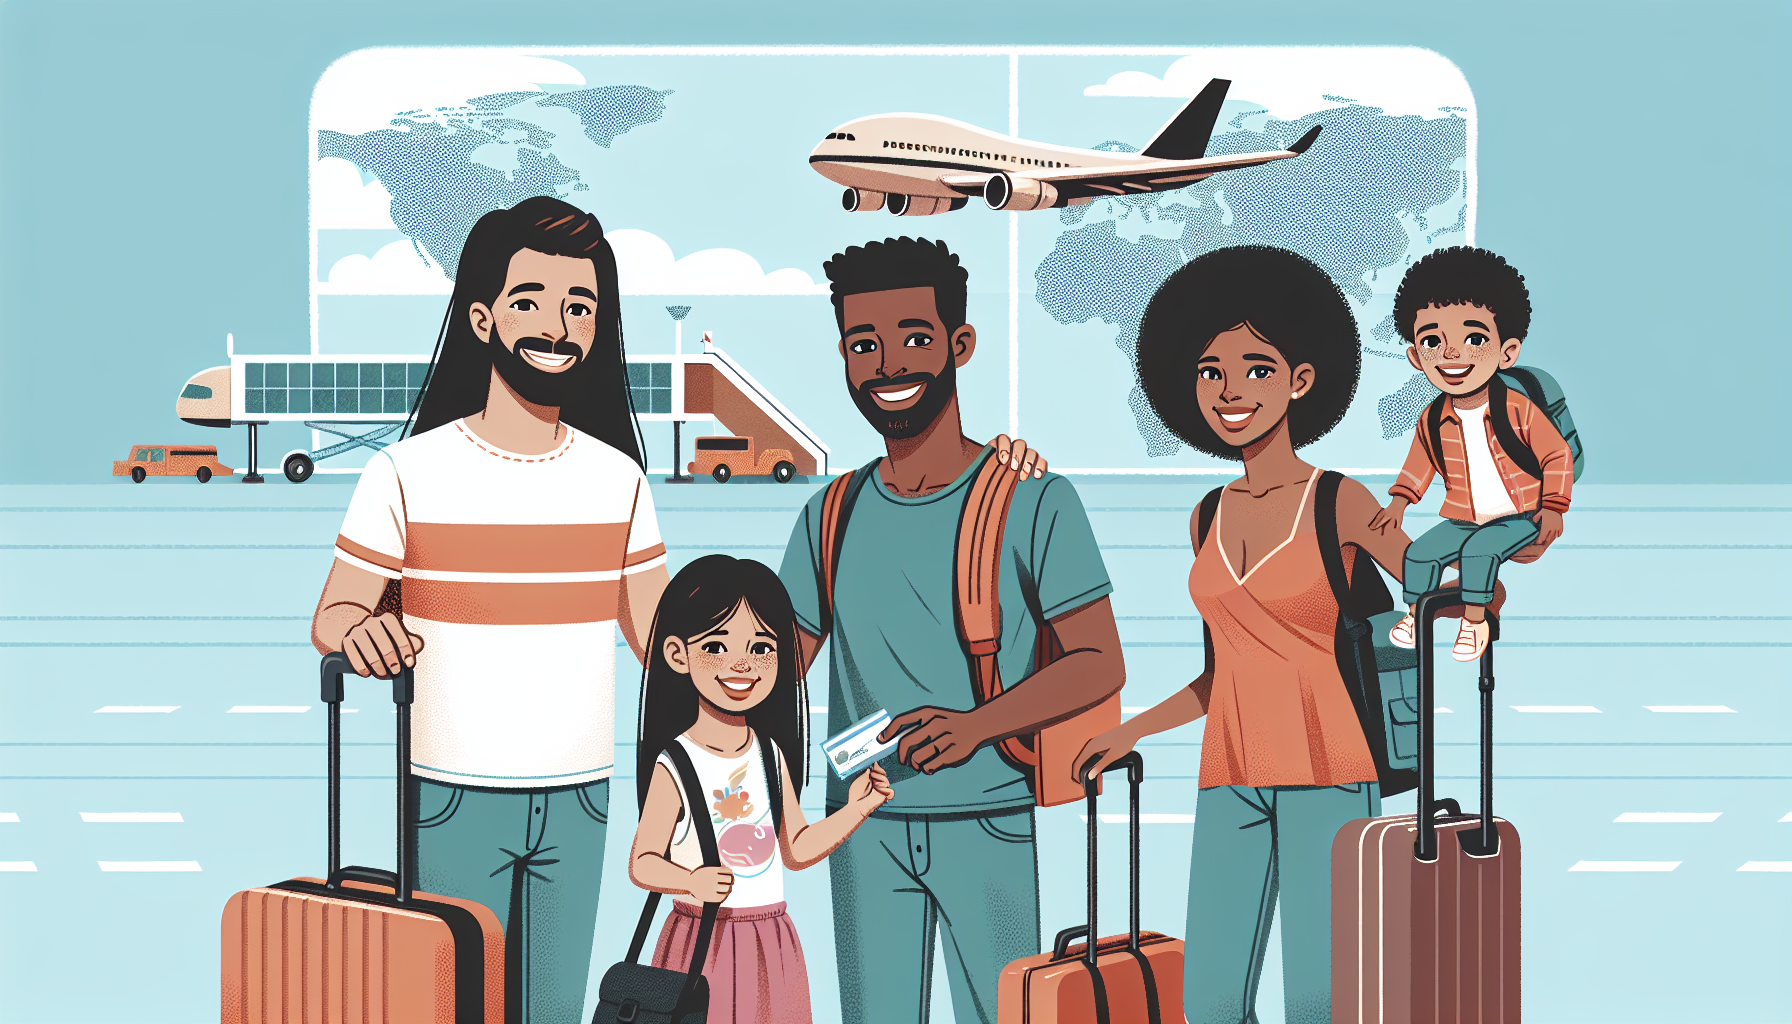 discover how to make traveling with kids stress-free with these fun tips! find out the best hacks and tricks to ensure a smooth and enjoyable family trip.